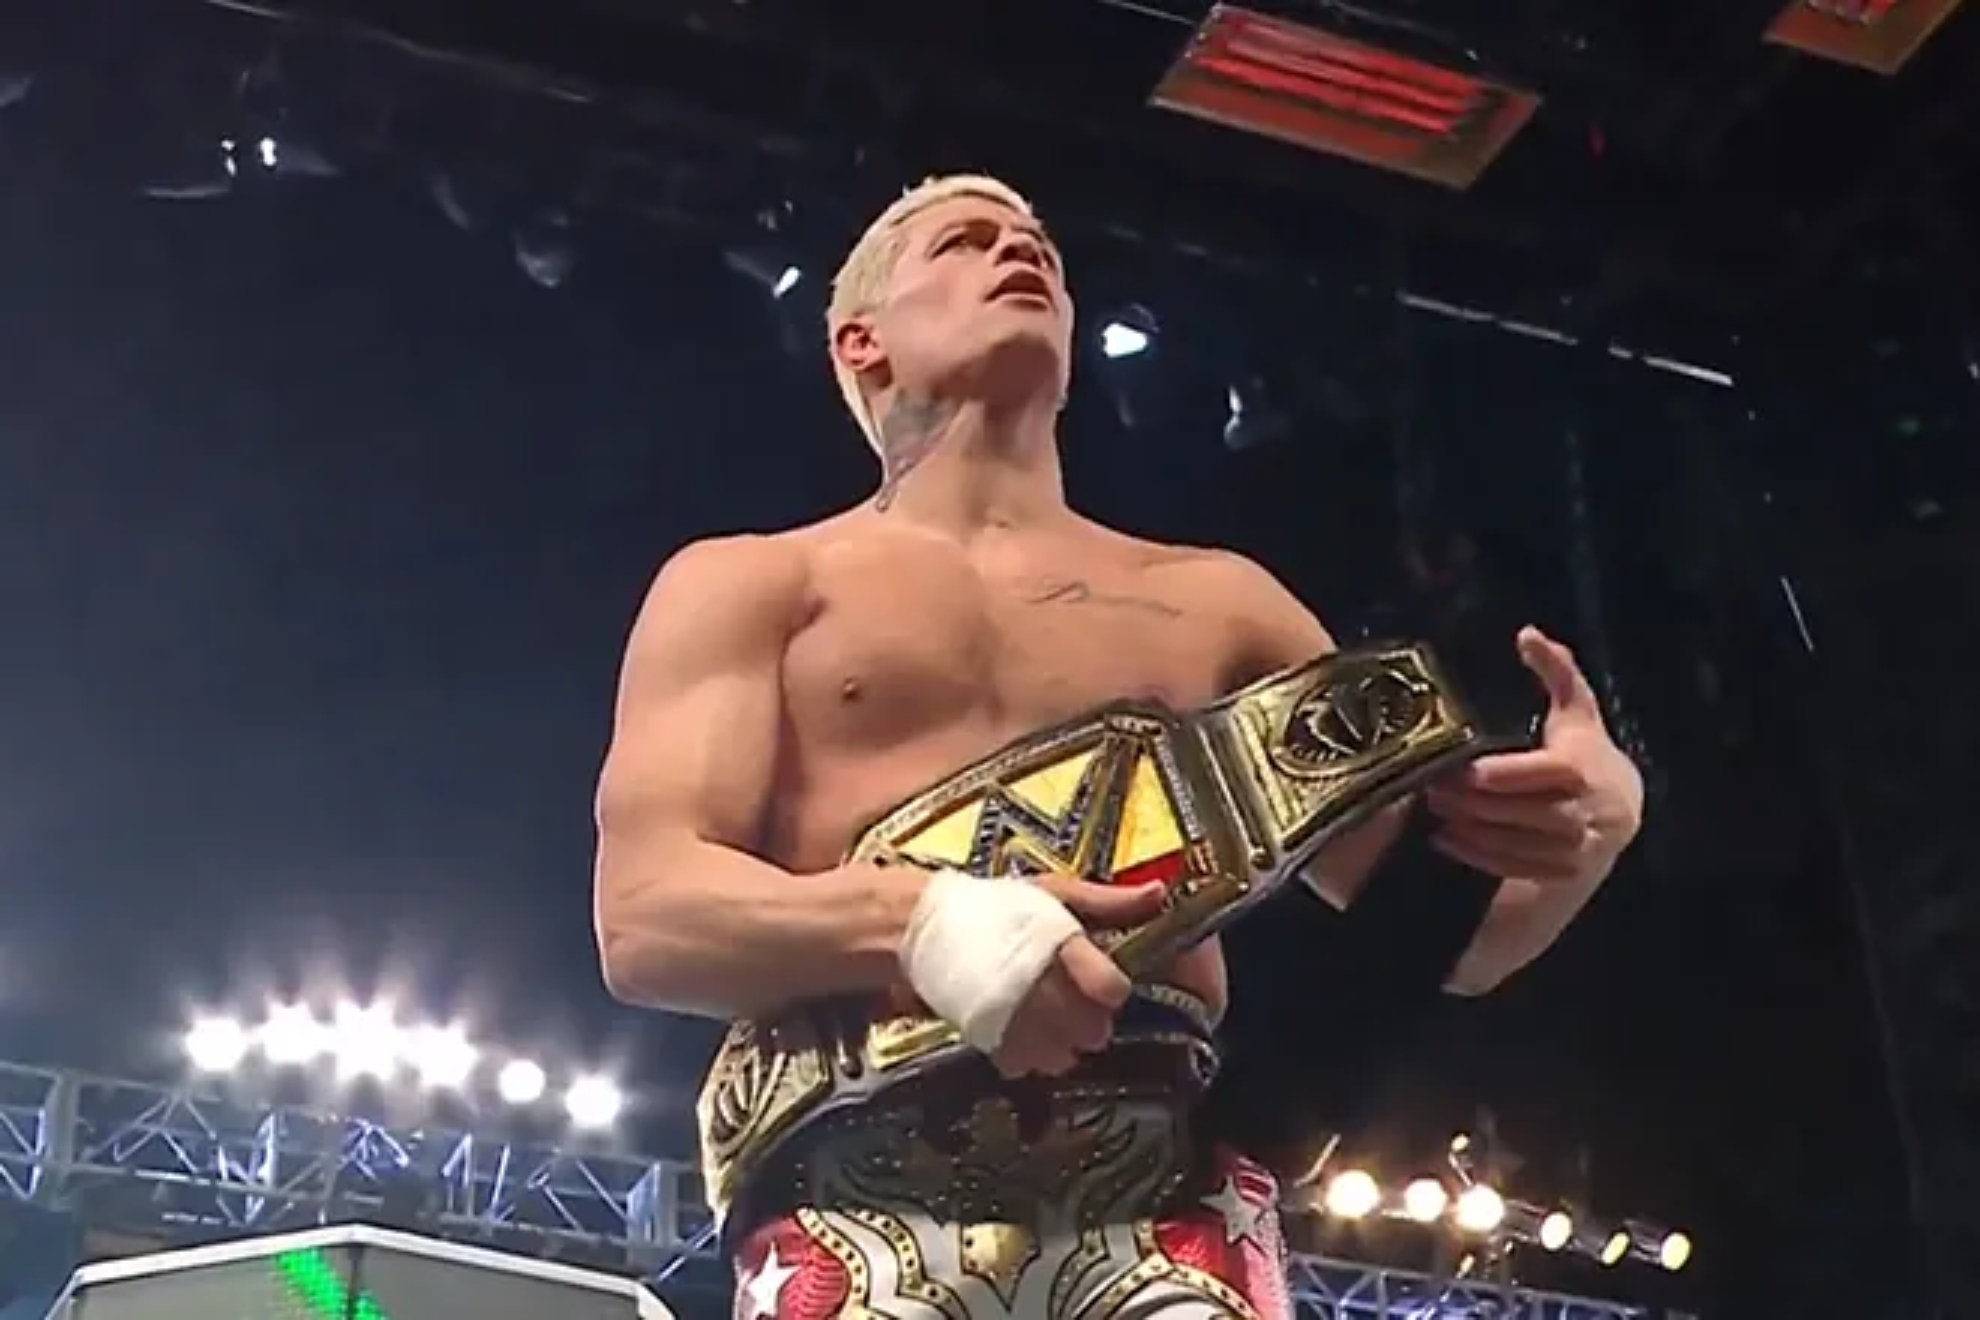 Cody Rhodes conquers WrestleMania XL becoming the WWE Undisputed Universal Champion